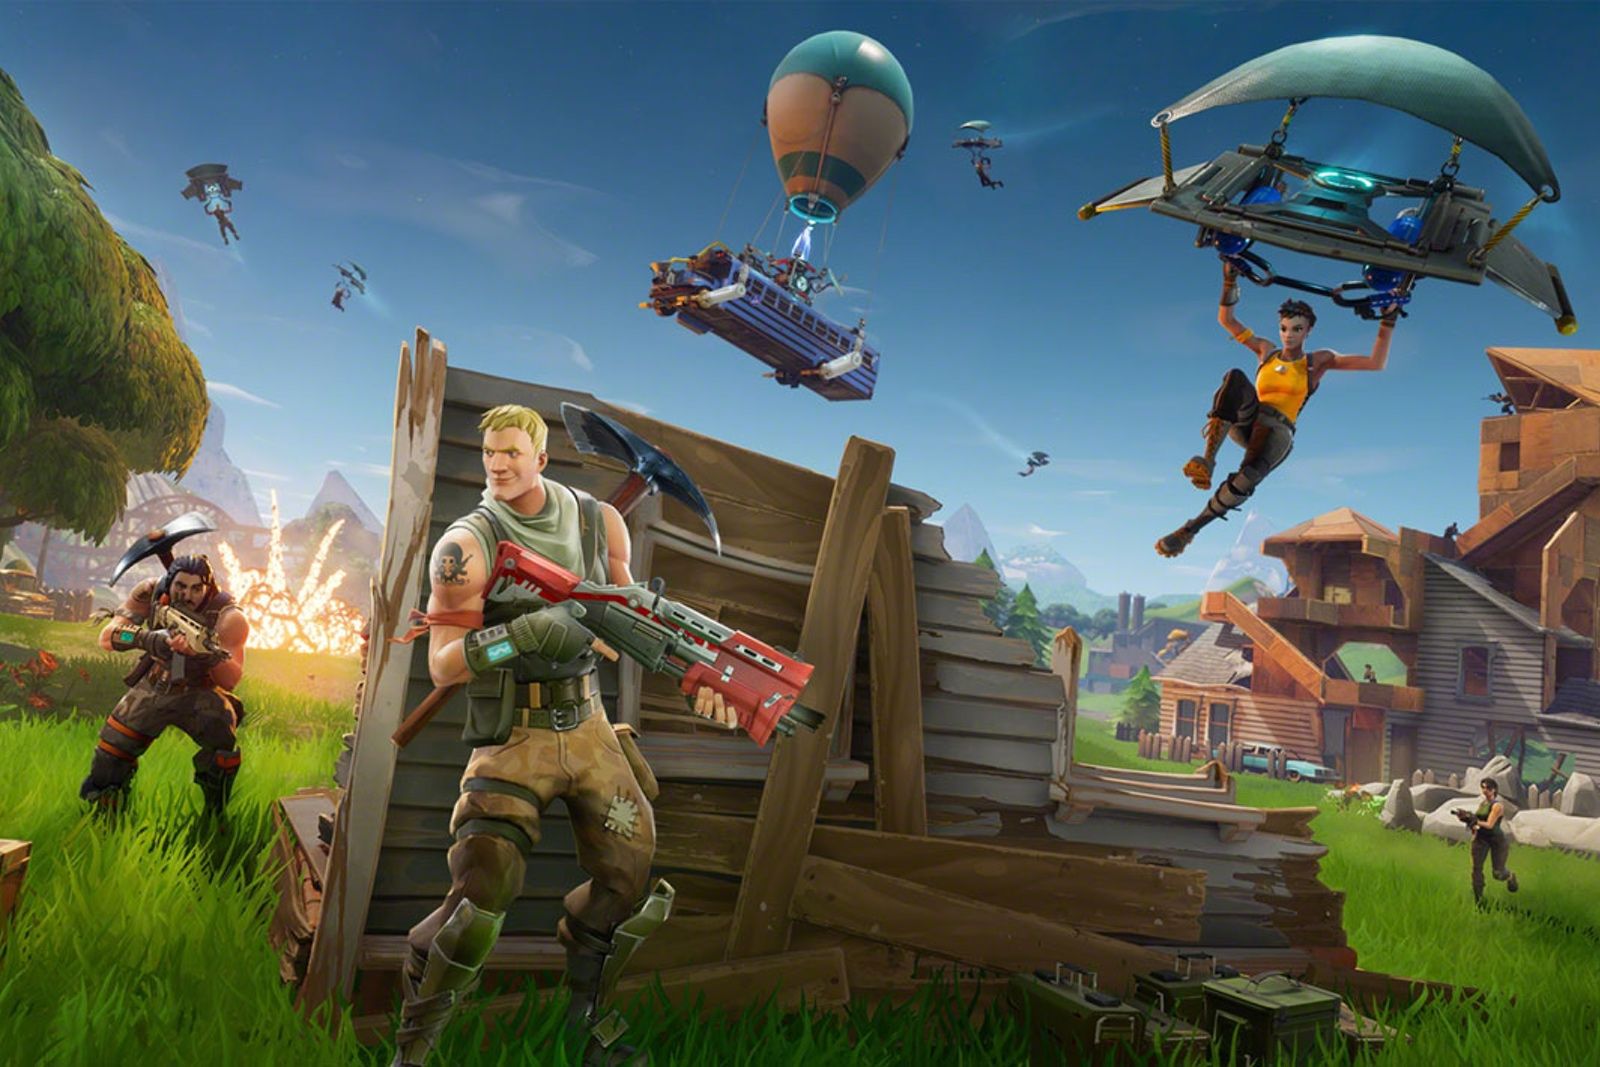 What Is Fortnite What Is The Battle Royale Game How Does It Work And What Devices Can You Play It On image 1